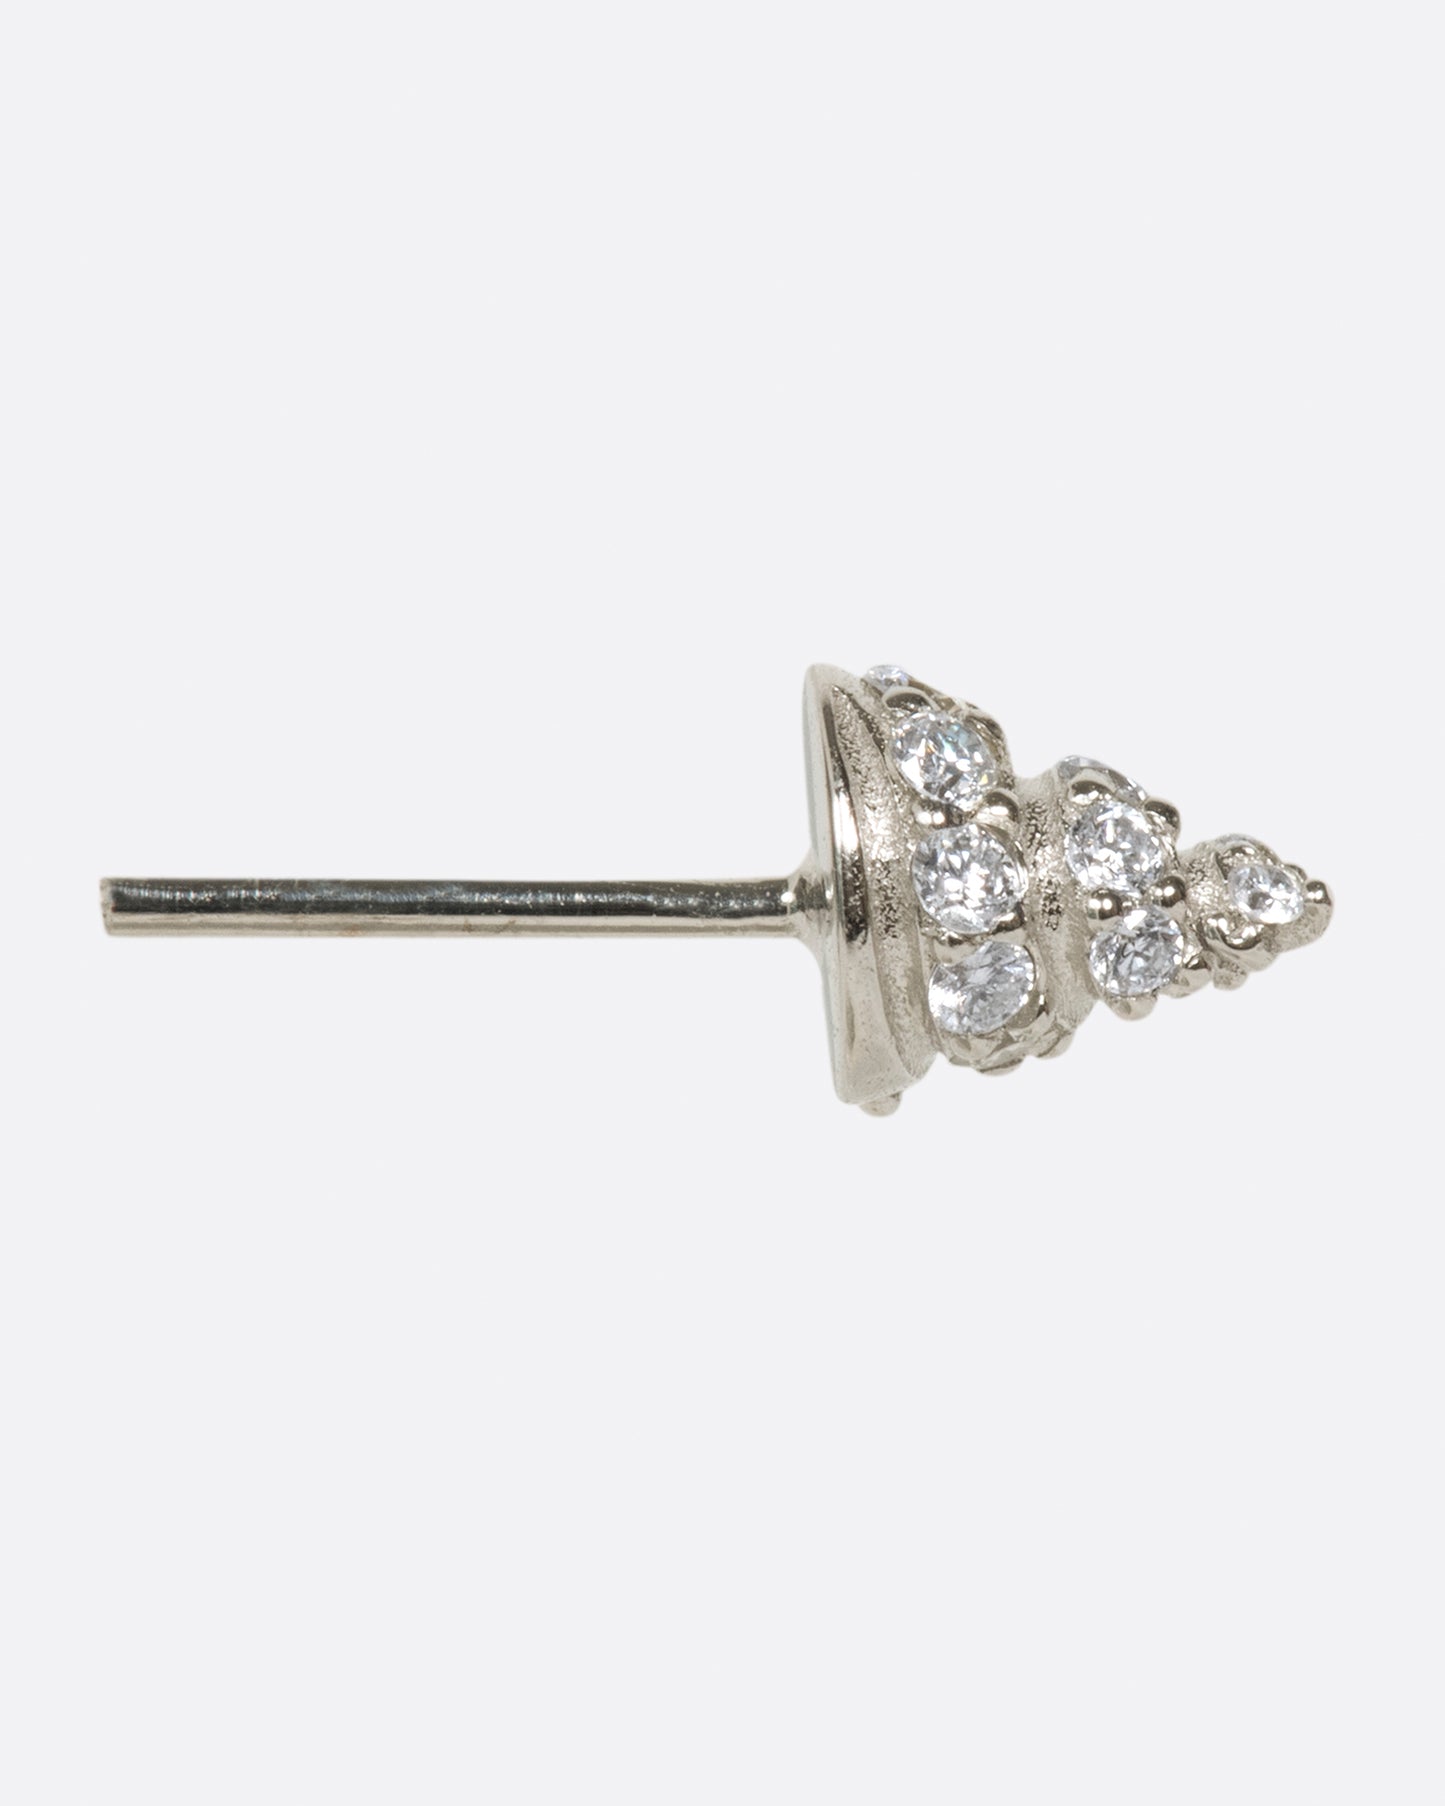 A pointed stud, in your choice of gold, with diamonds wrapped around it.